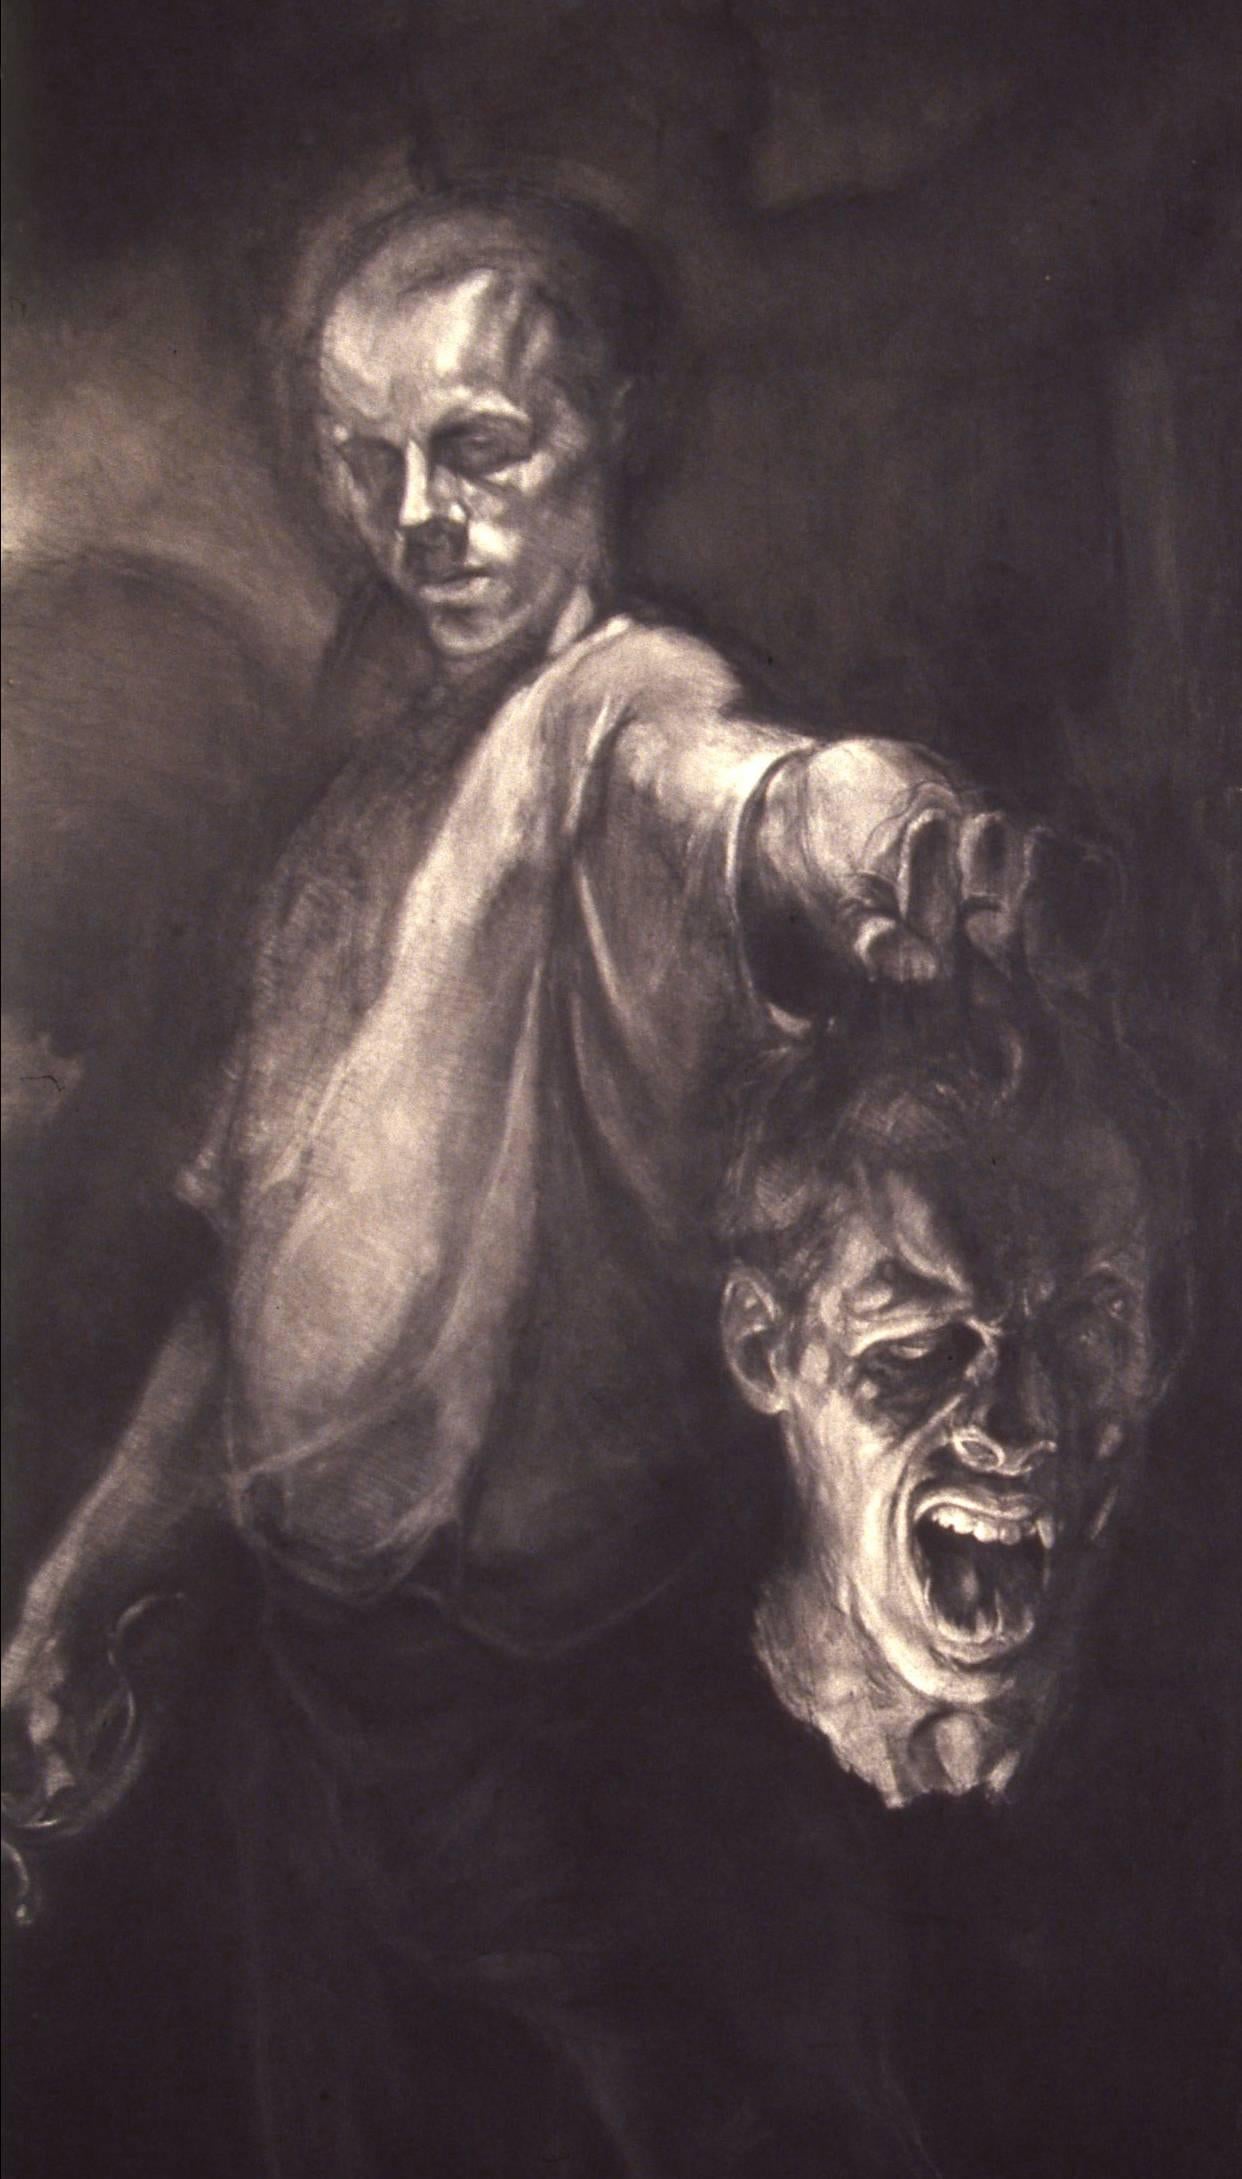 Christopher Ganz Figurative Painting - David & Goliath - Caravaggio Inspired Monumental Double Self-Portrait, Charcoal